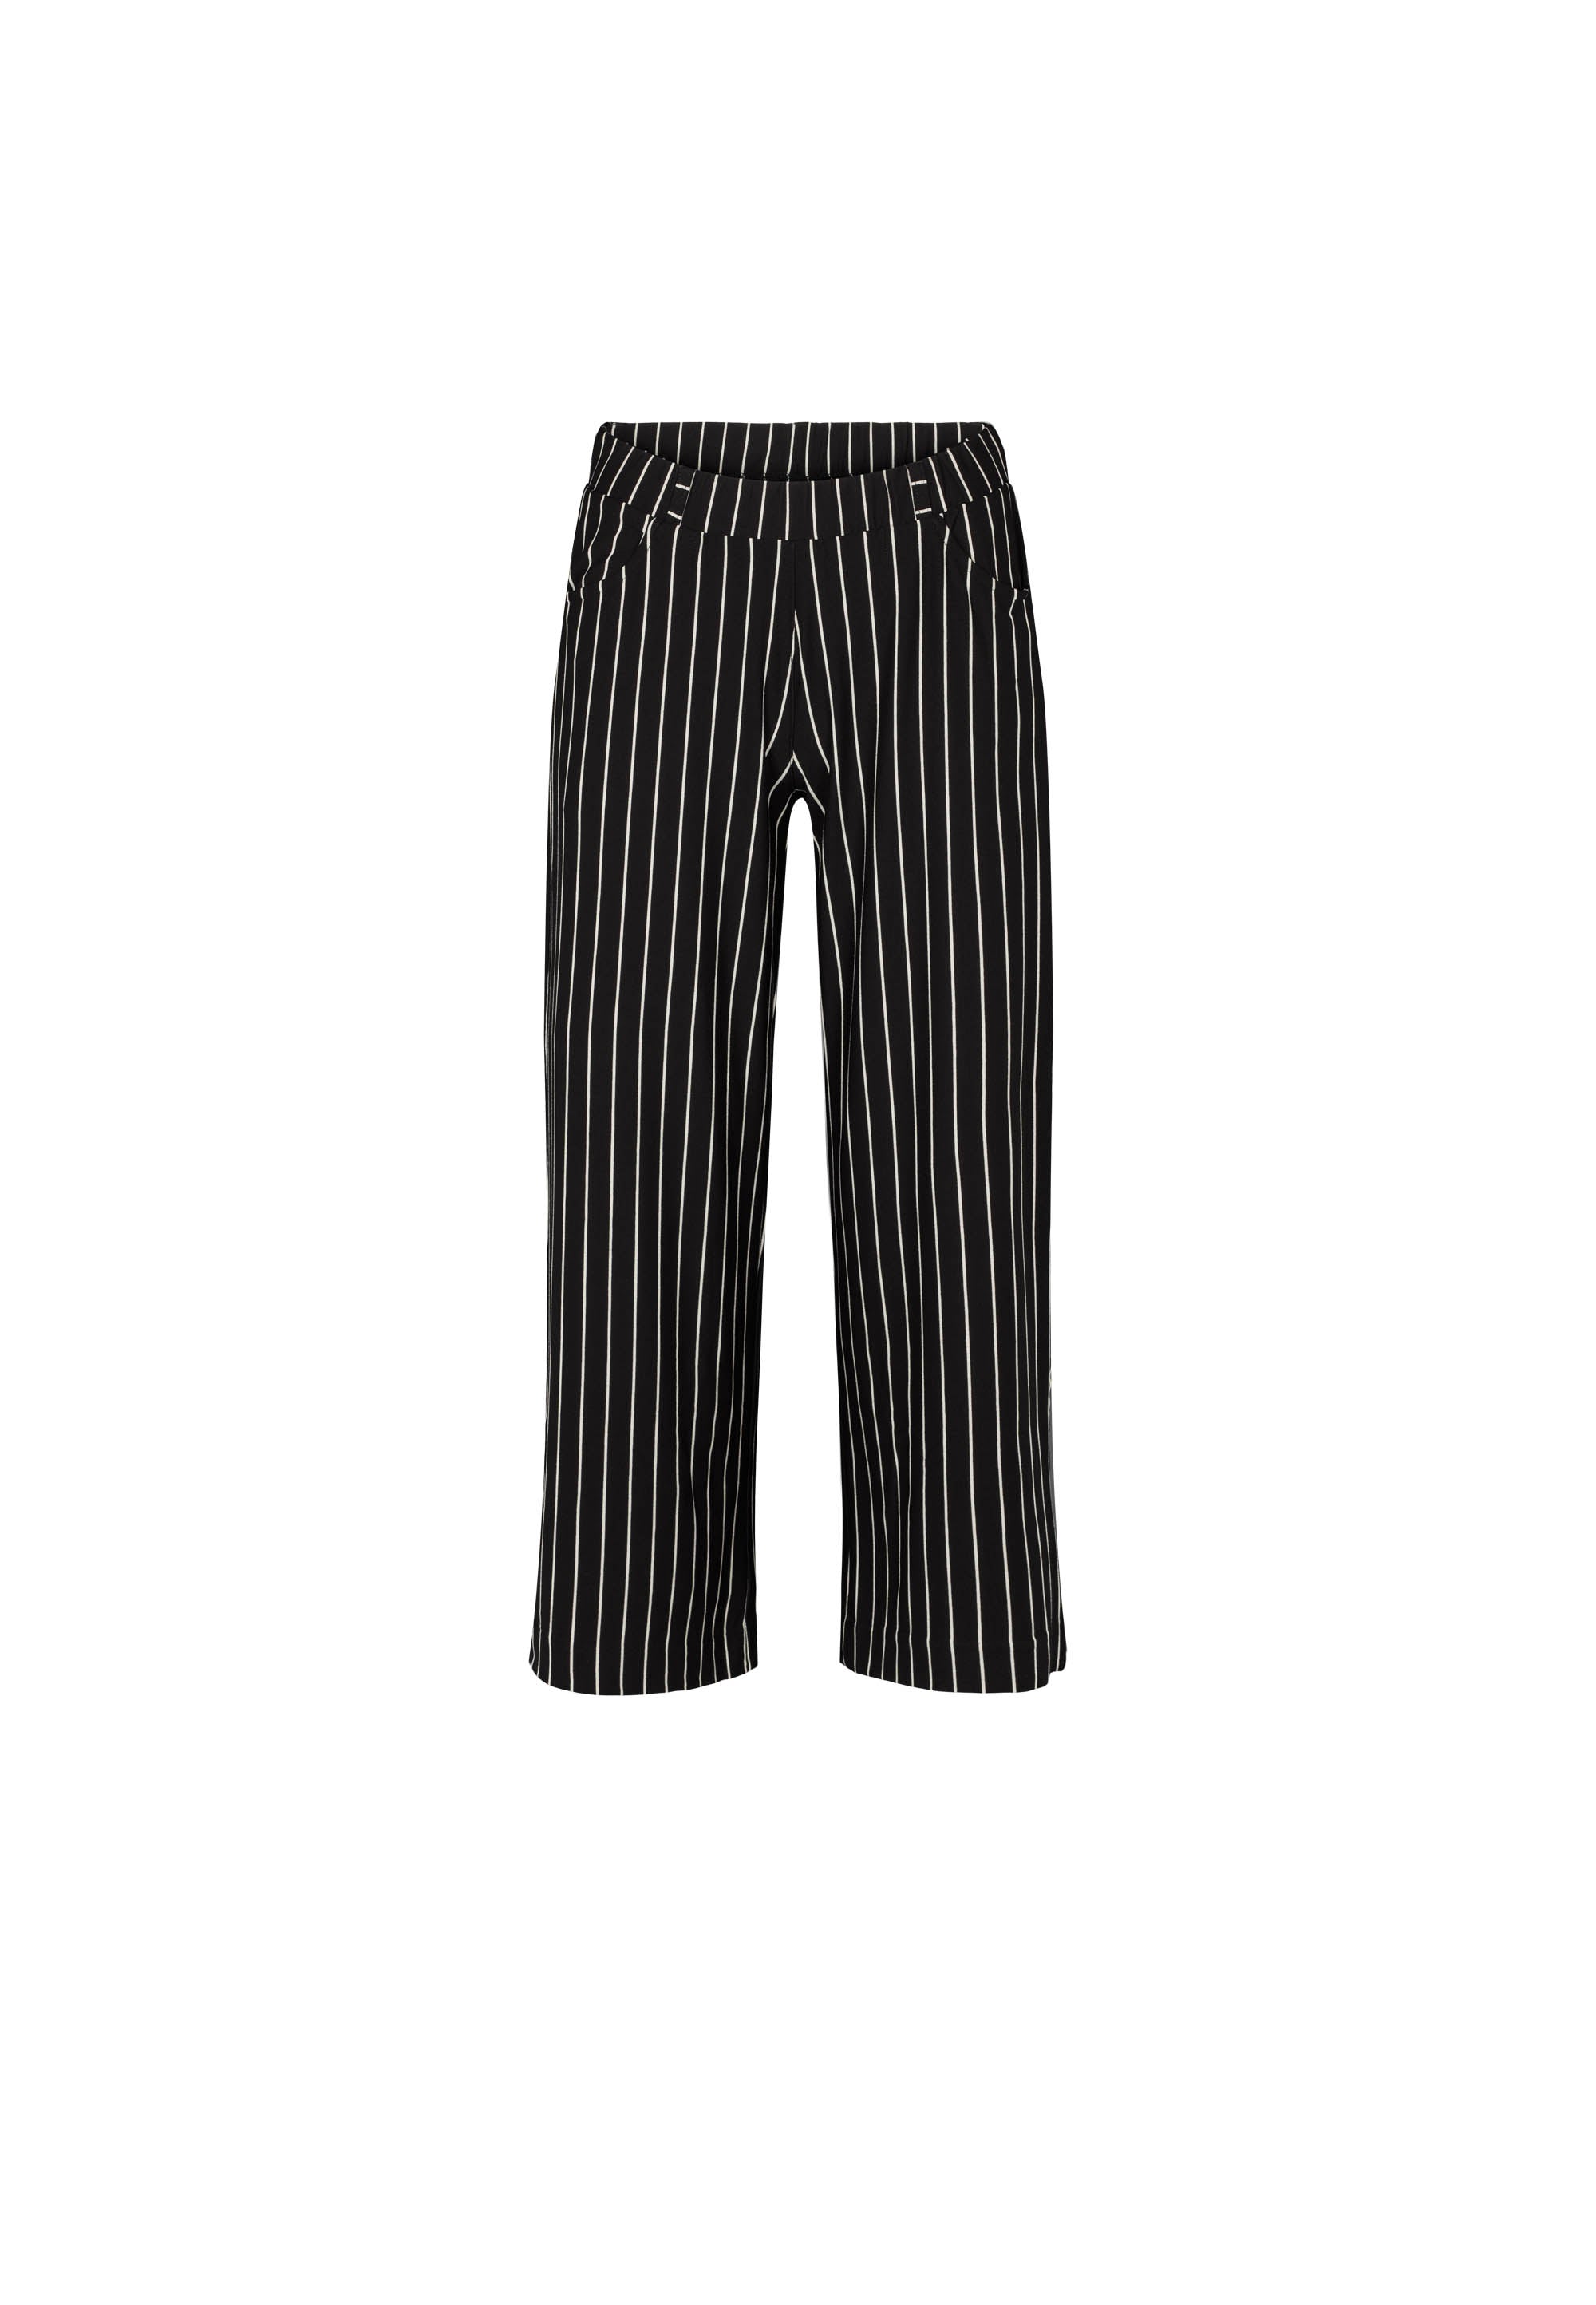 LAURIE  Donna Loose Jersey Crop Trousers LOOSE 99222 Black Stripe